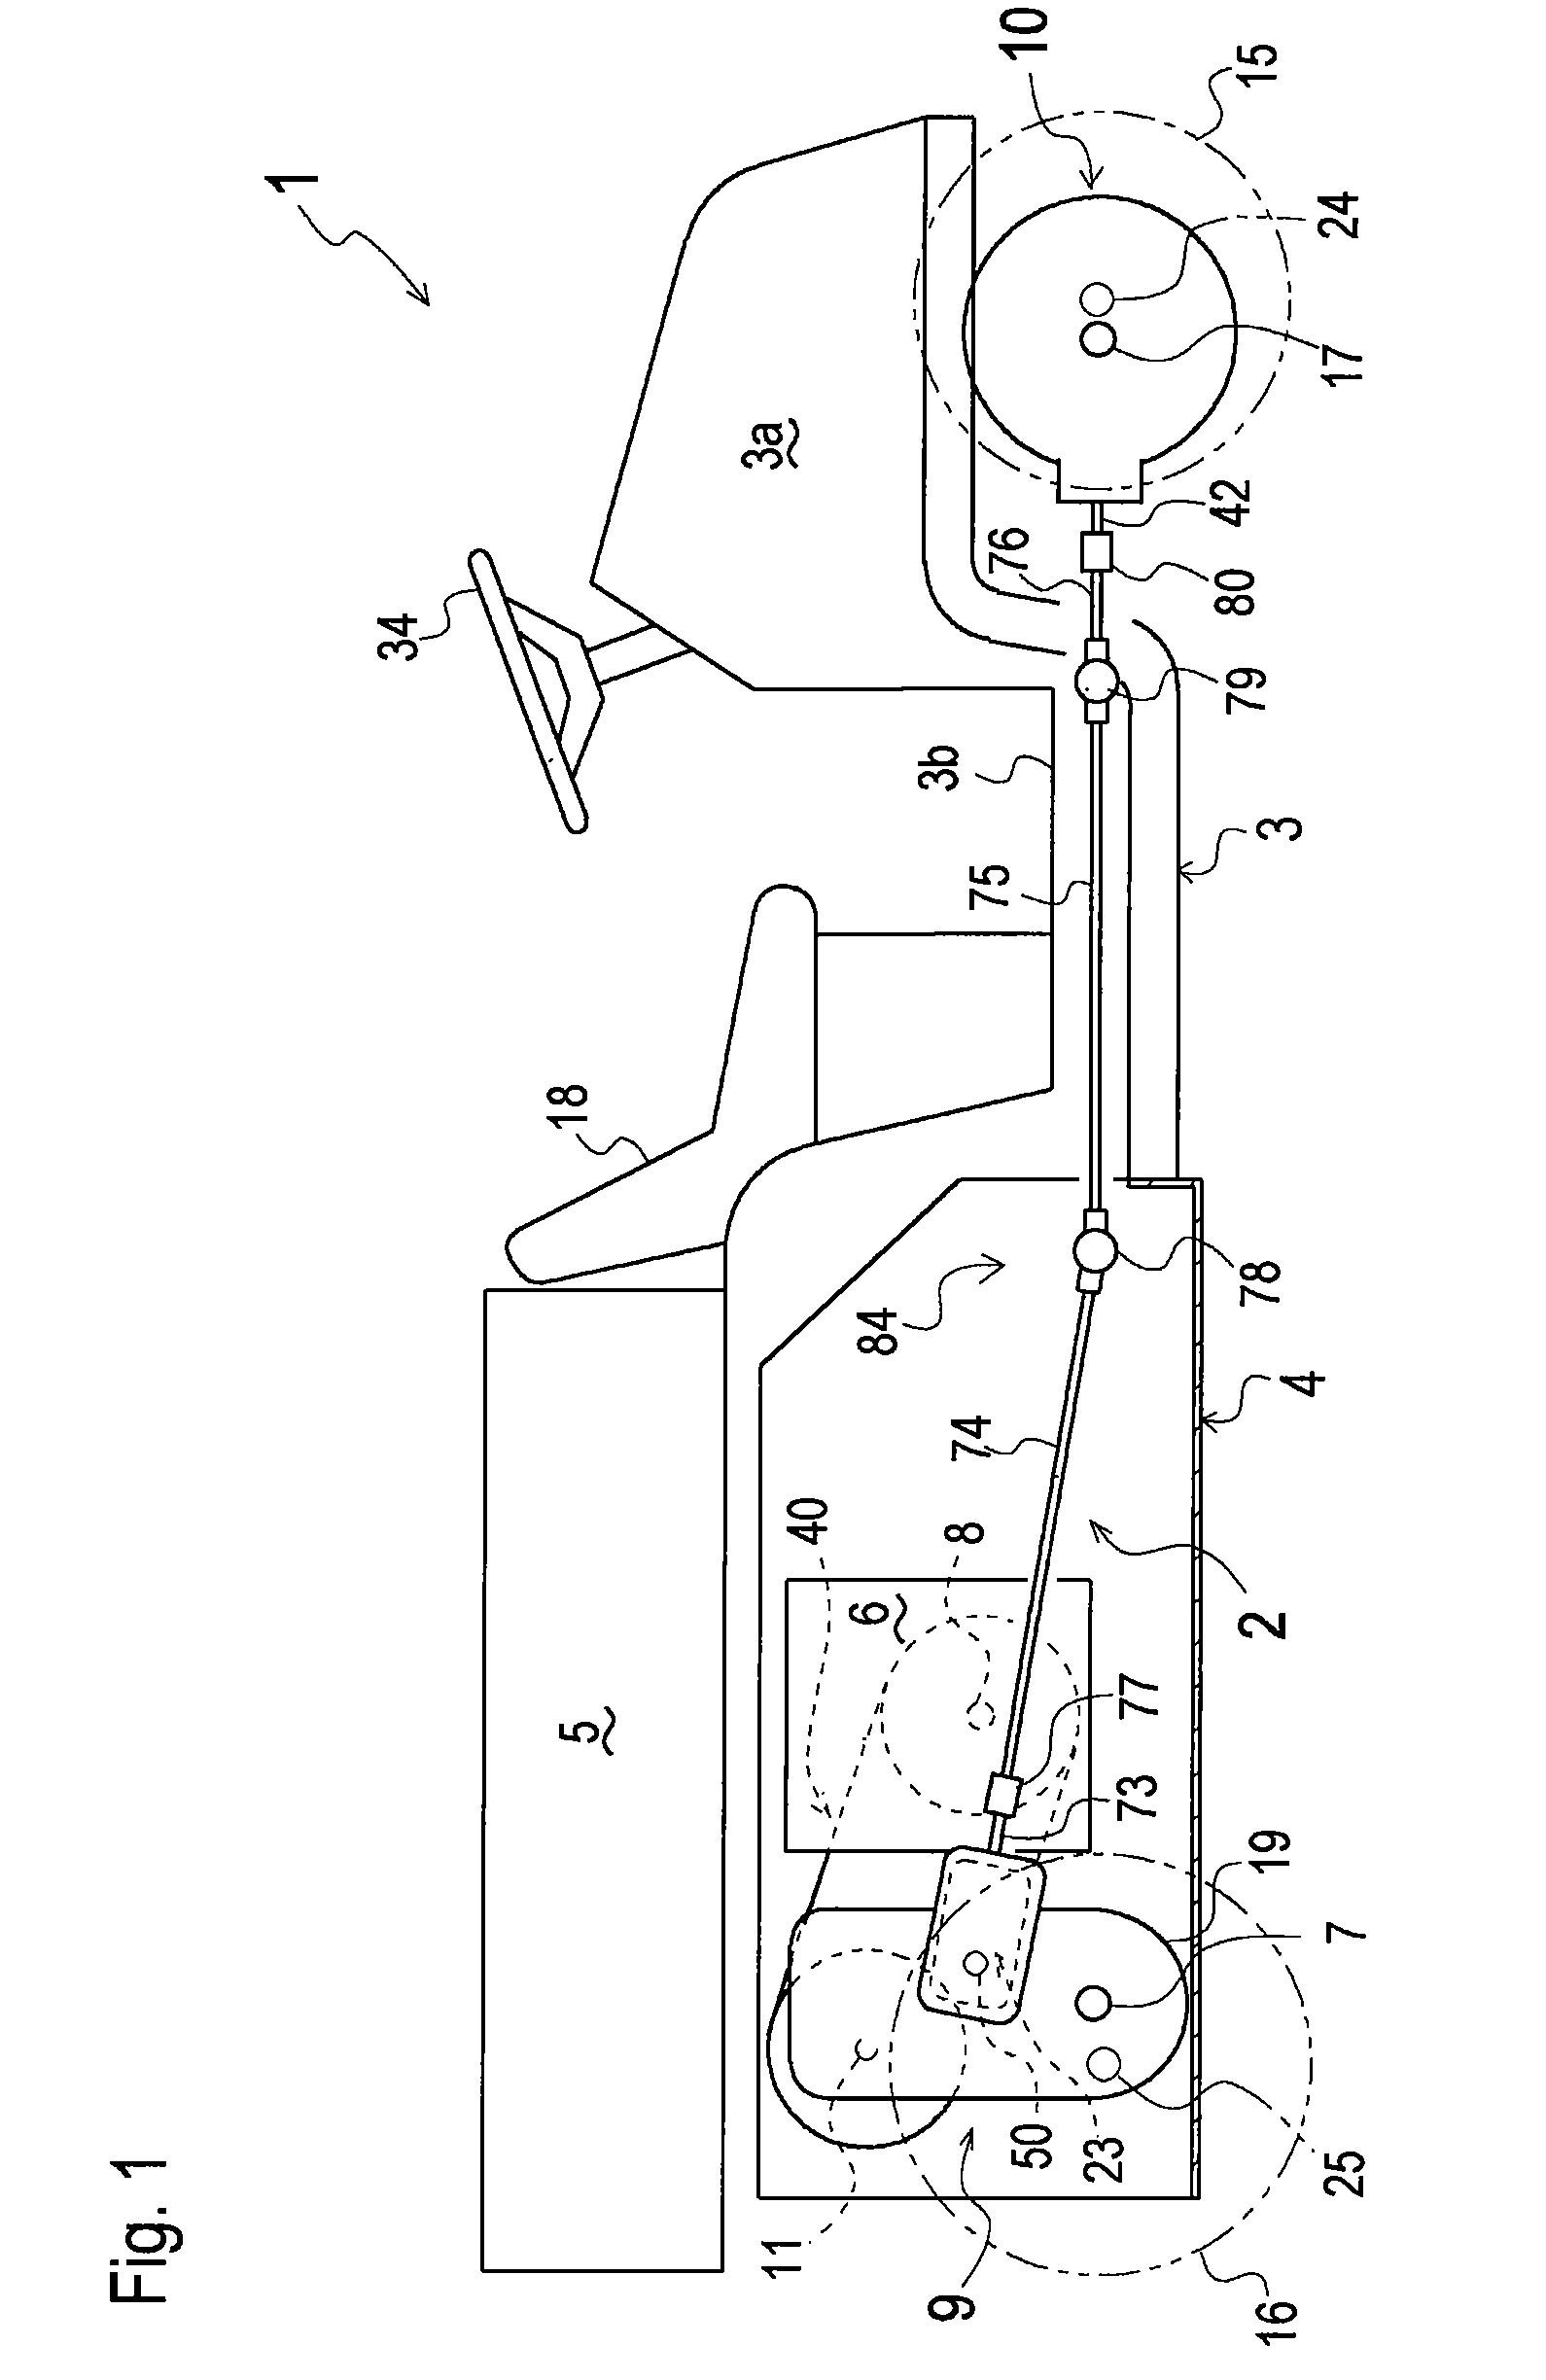 Transaxle Provided With Power Take-Off Device